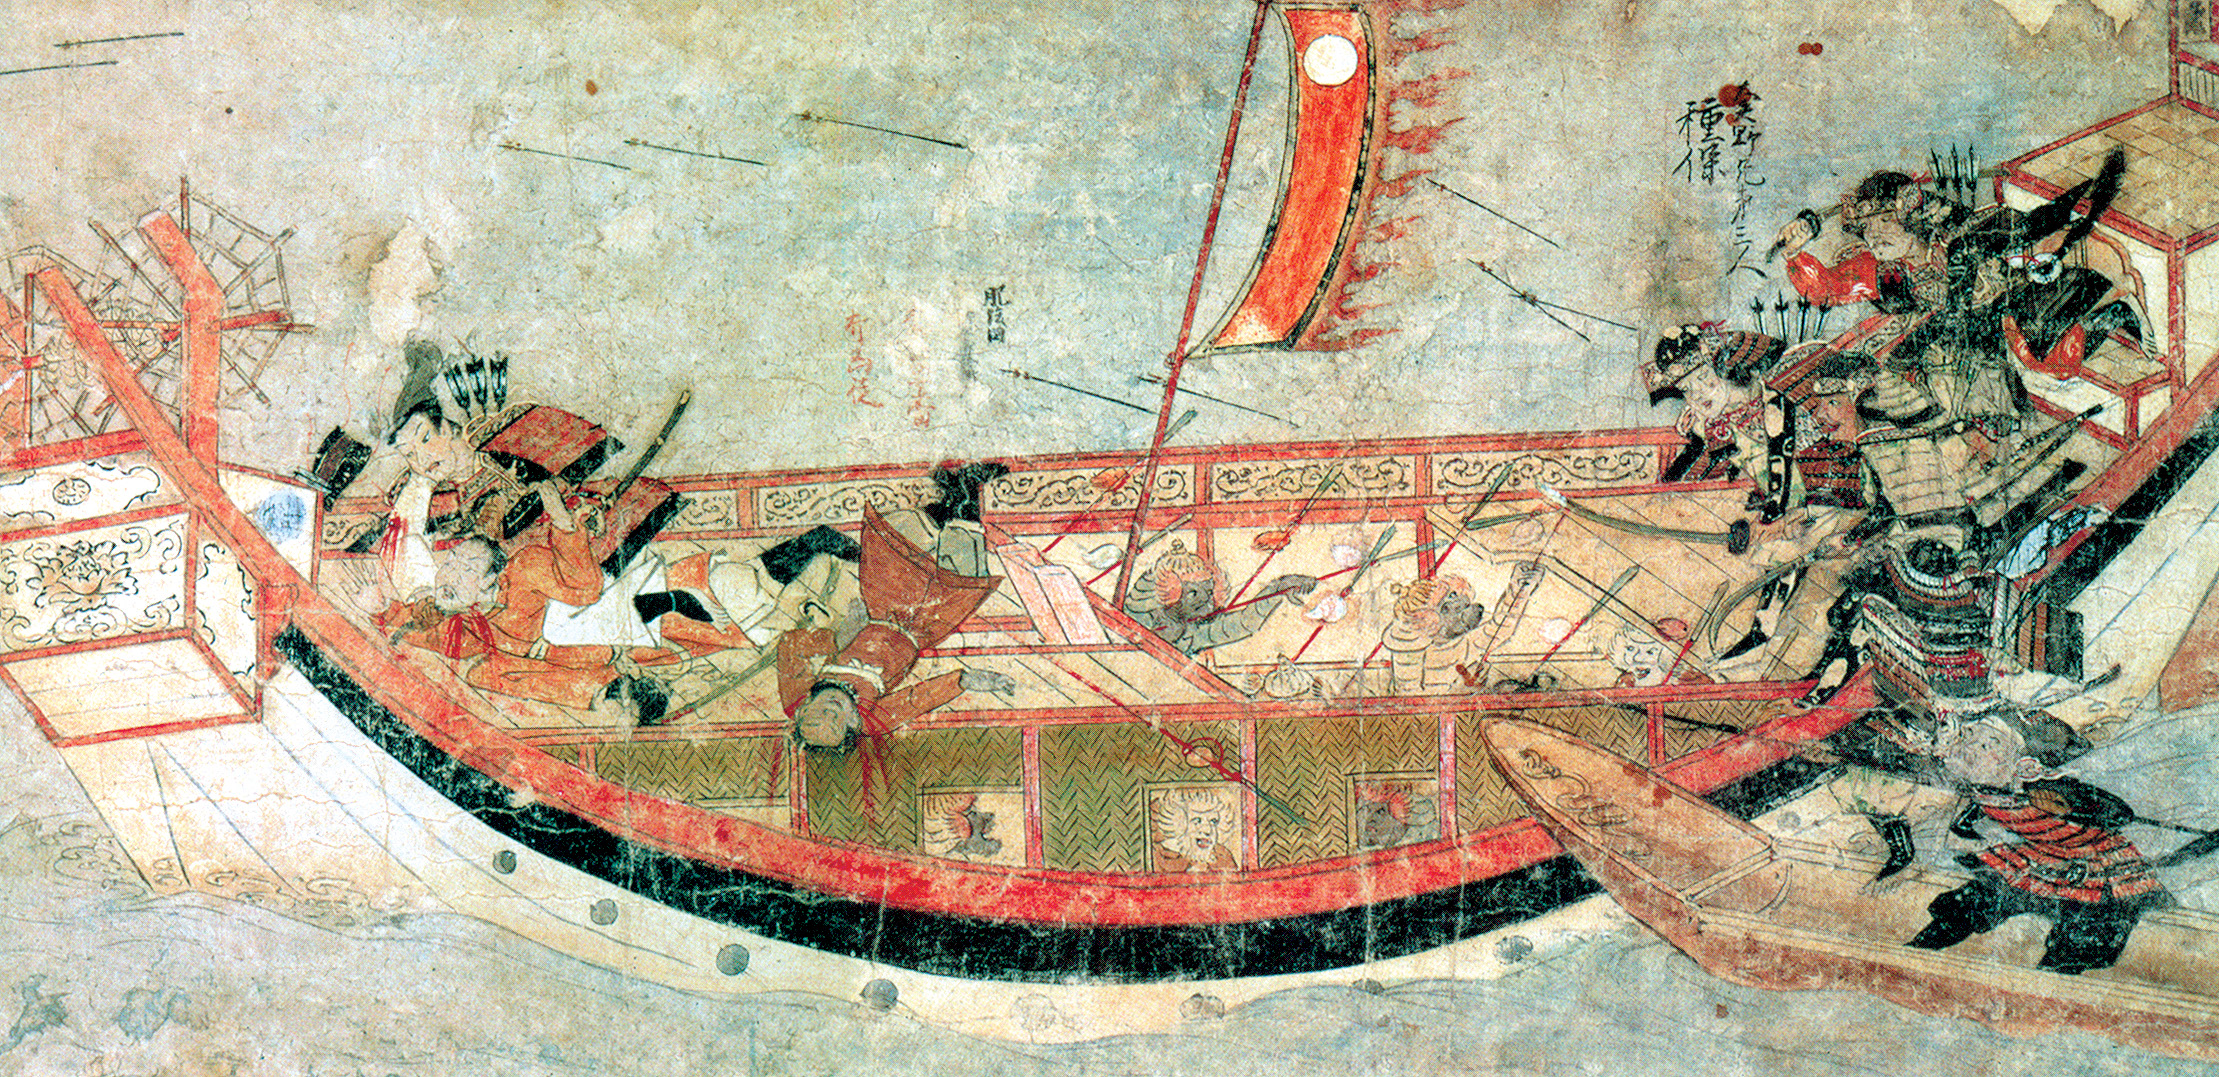 Japanese soldiers steal aboard a Mongol vessel in Kublai Khan’s invasion effort. Japanese archers helped repel Kublai’s first landing. 